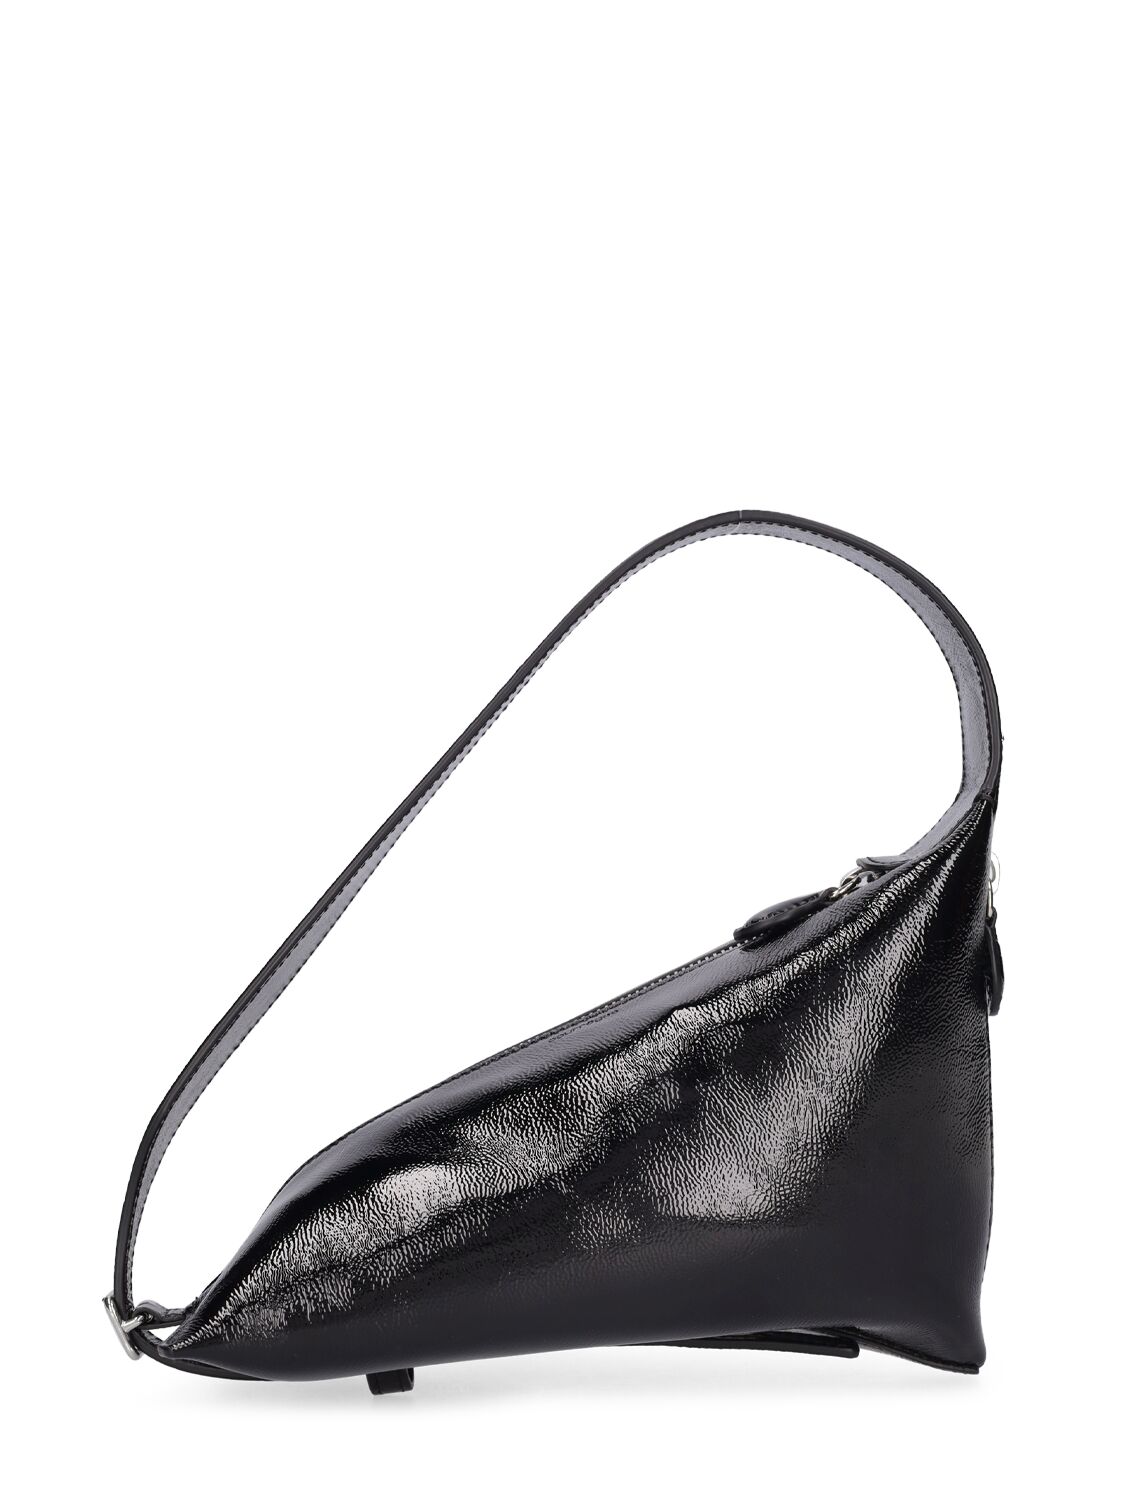 Courrèges The One Patent Leather Shoulder Bag In Black